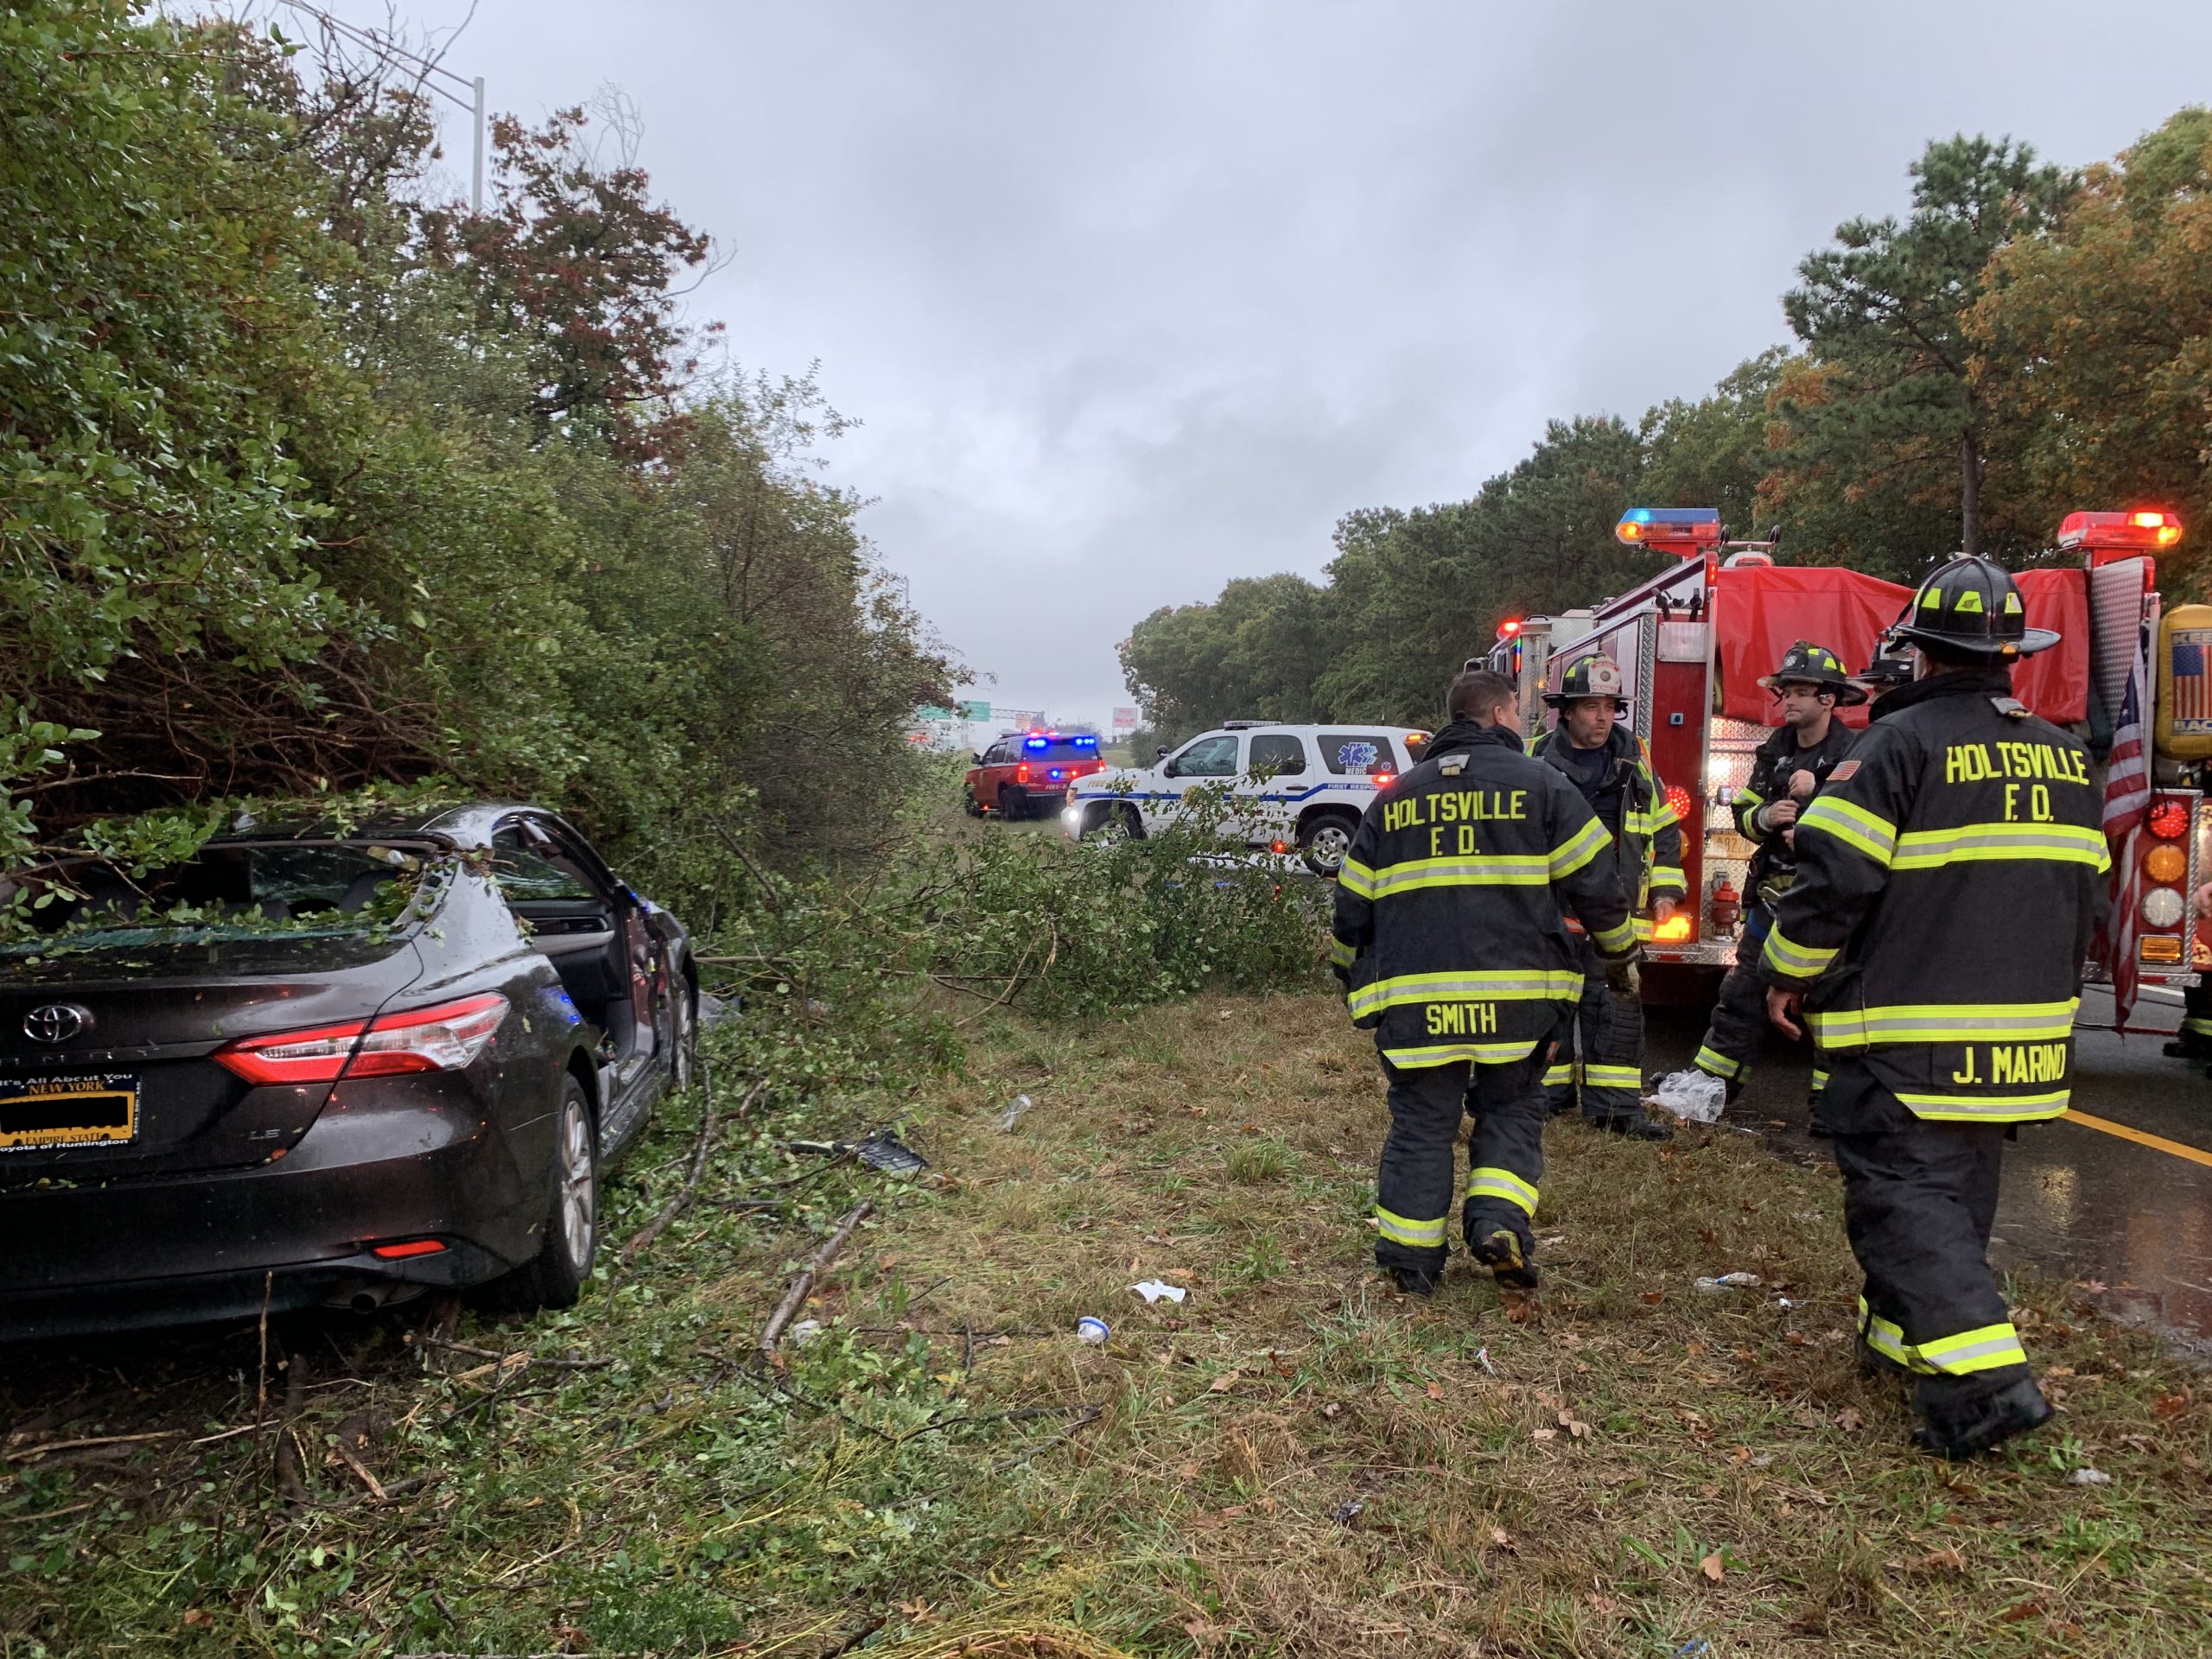 Holtsville FD Responds to Heavy Rescue